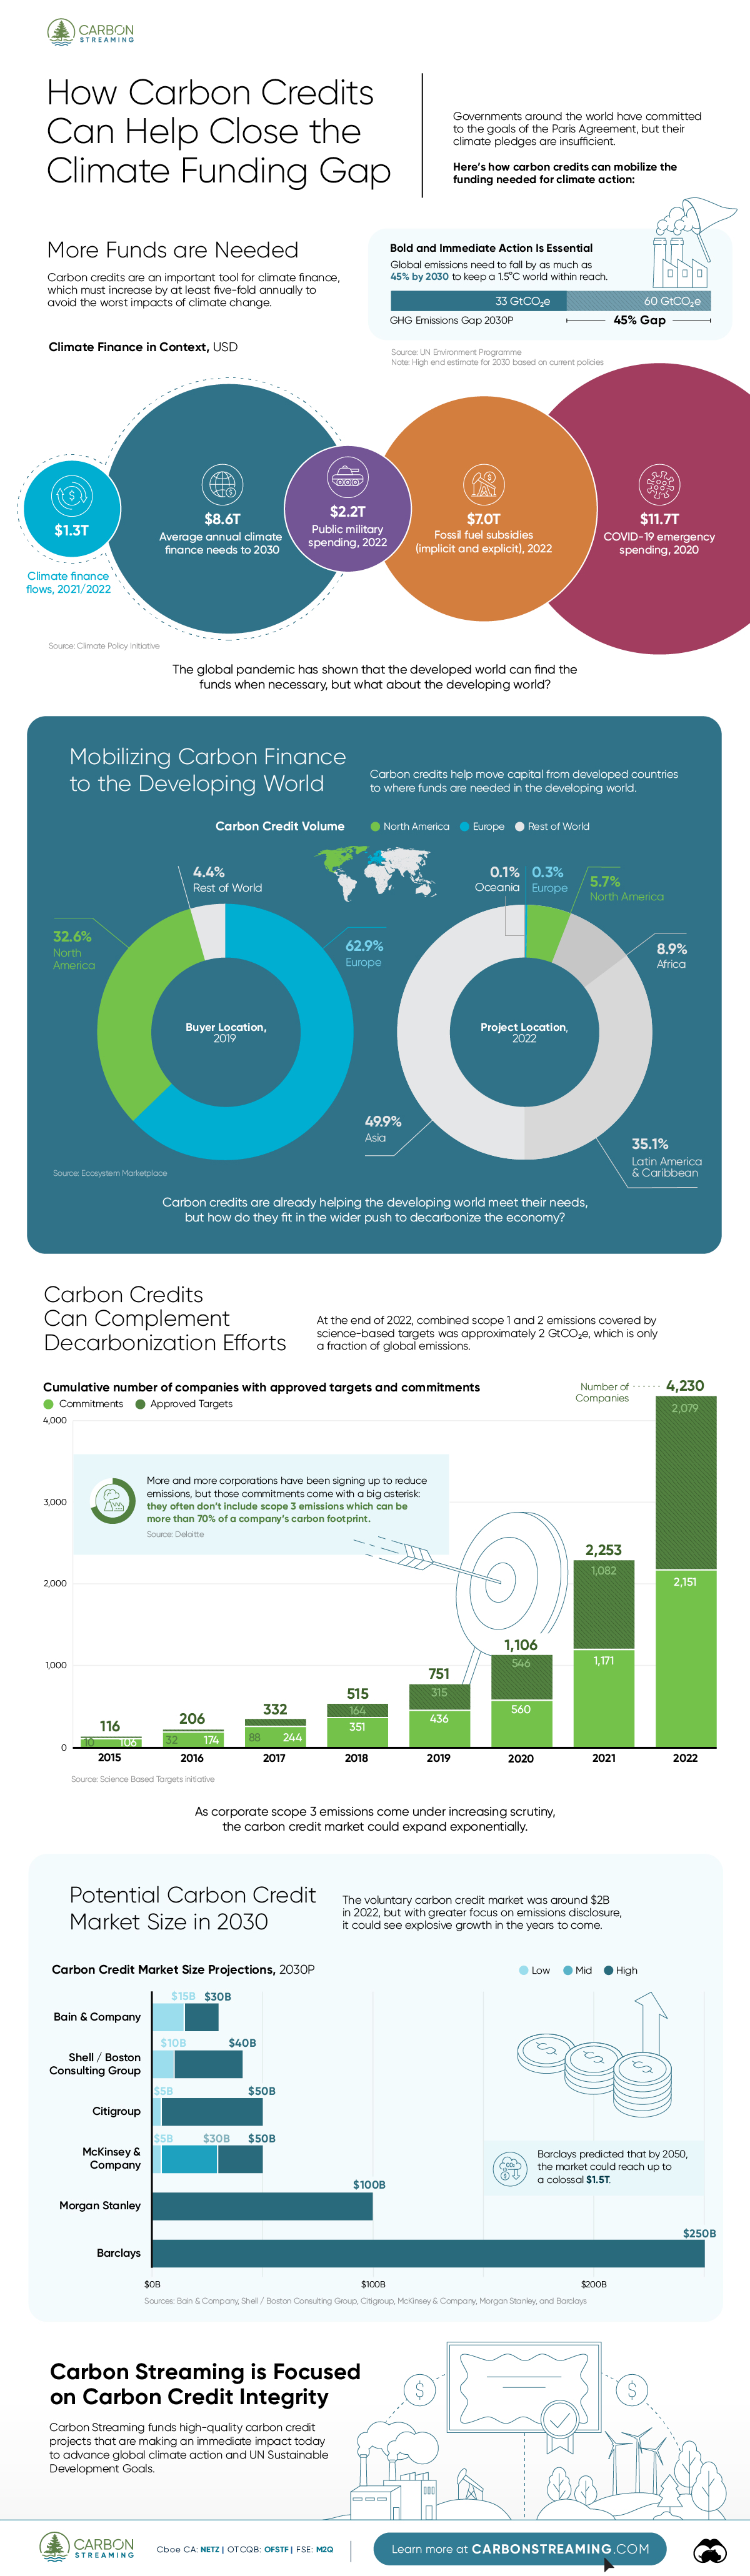 Infographic featuring a bubble chart using data from the Climate Policy Institute, a pair of pie charts using data from Ecosystem Marketplace, a stacked bar chart showing corporate carbon emission targets using data from the Science-Based Targets initiative, and a bar chart showing analysts' projections for the size of the voluntary carbon credit market, that argues that carbon credits can help close the climate funding gap.